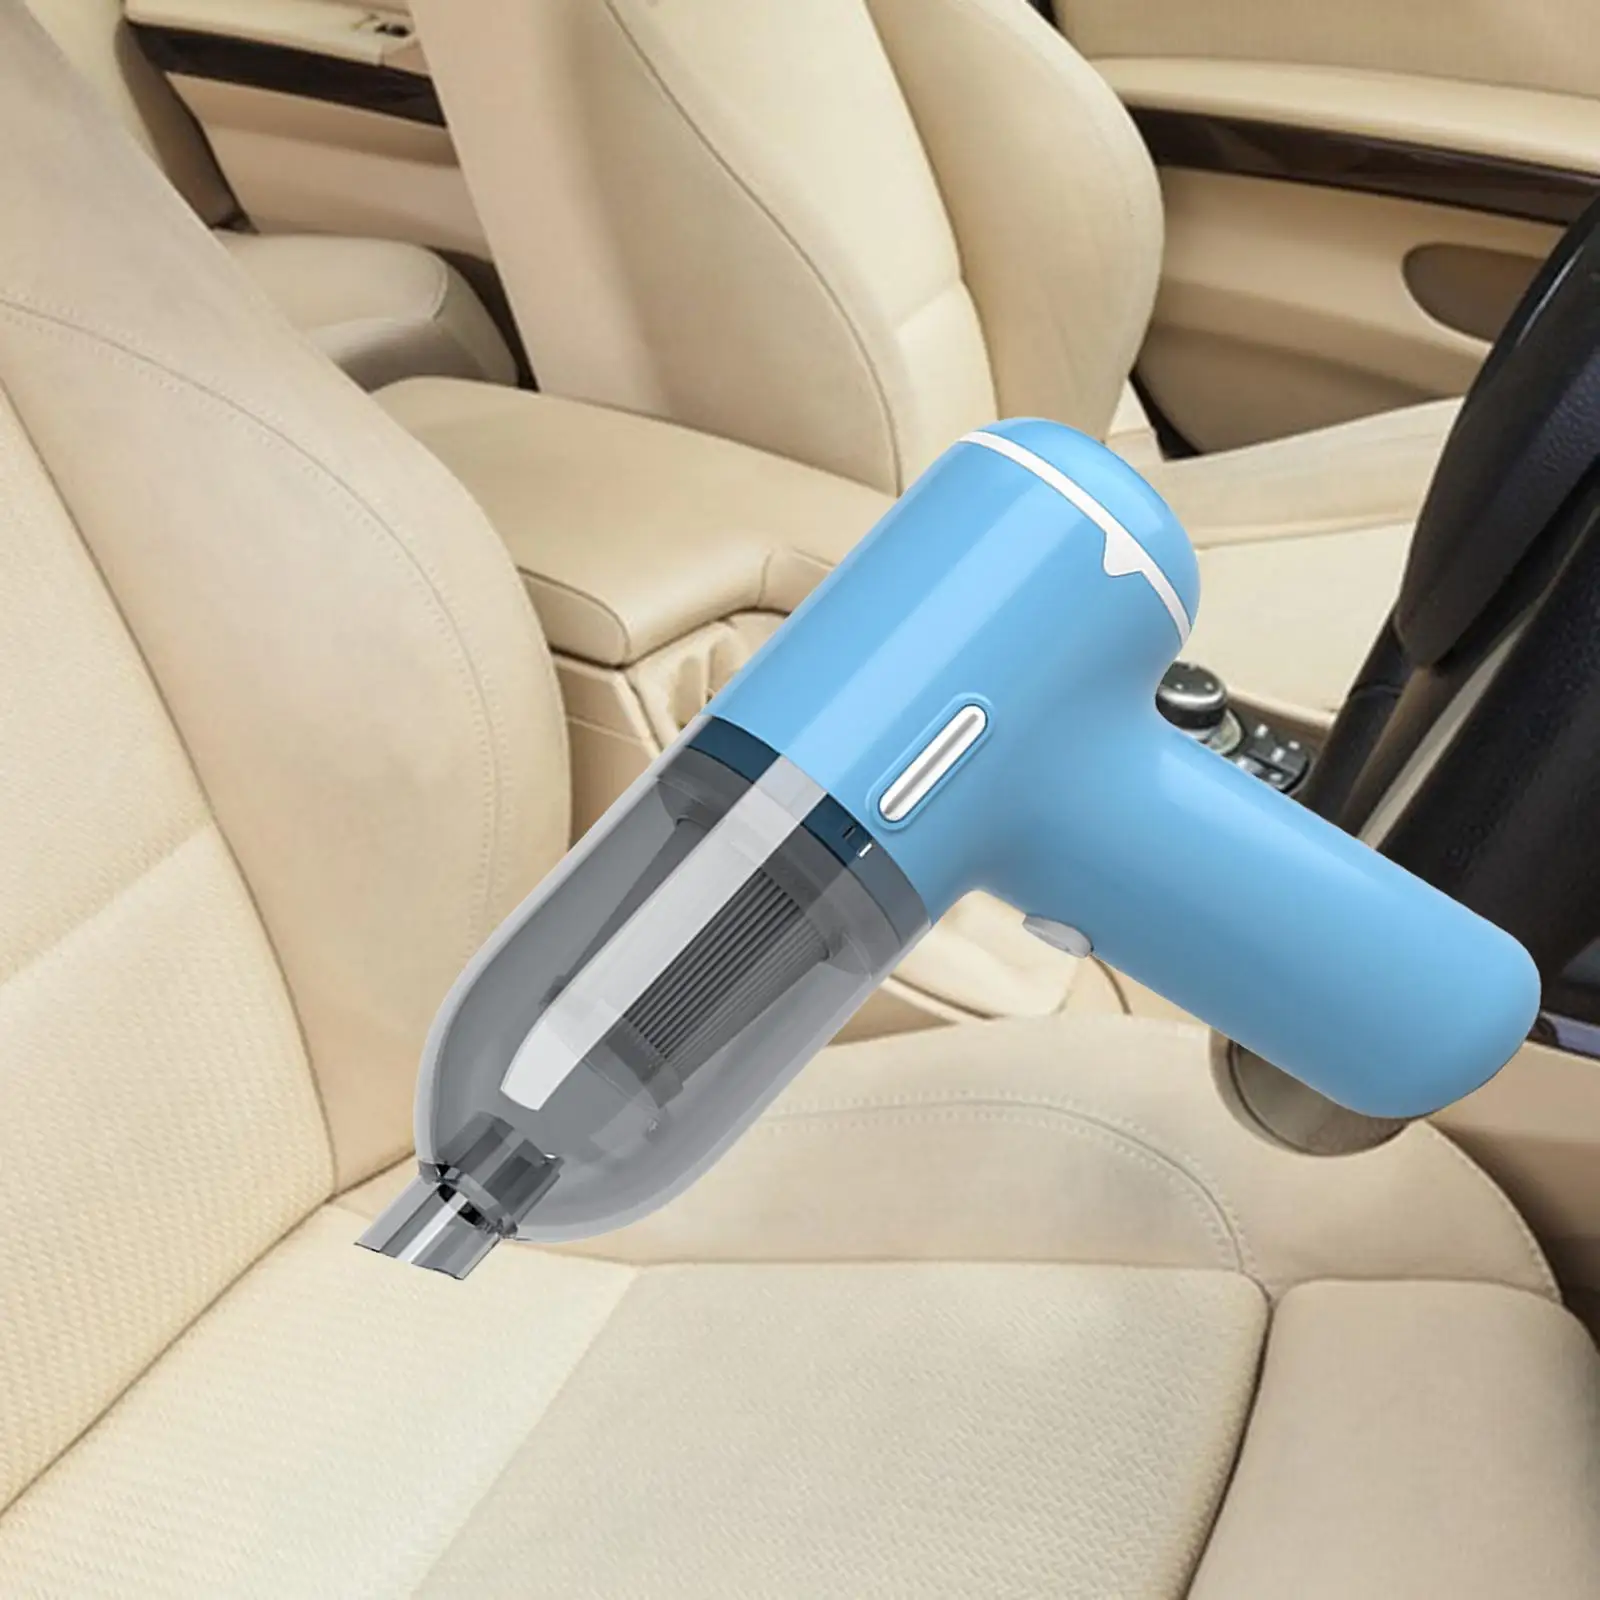 Handheld Car Vacuum Strong Suction Duster with Nozzles Robot Vacuum Cleaner for Household Car Dashboards Office Desktop Pillows